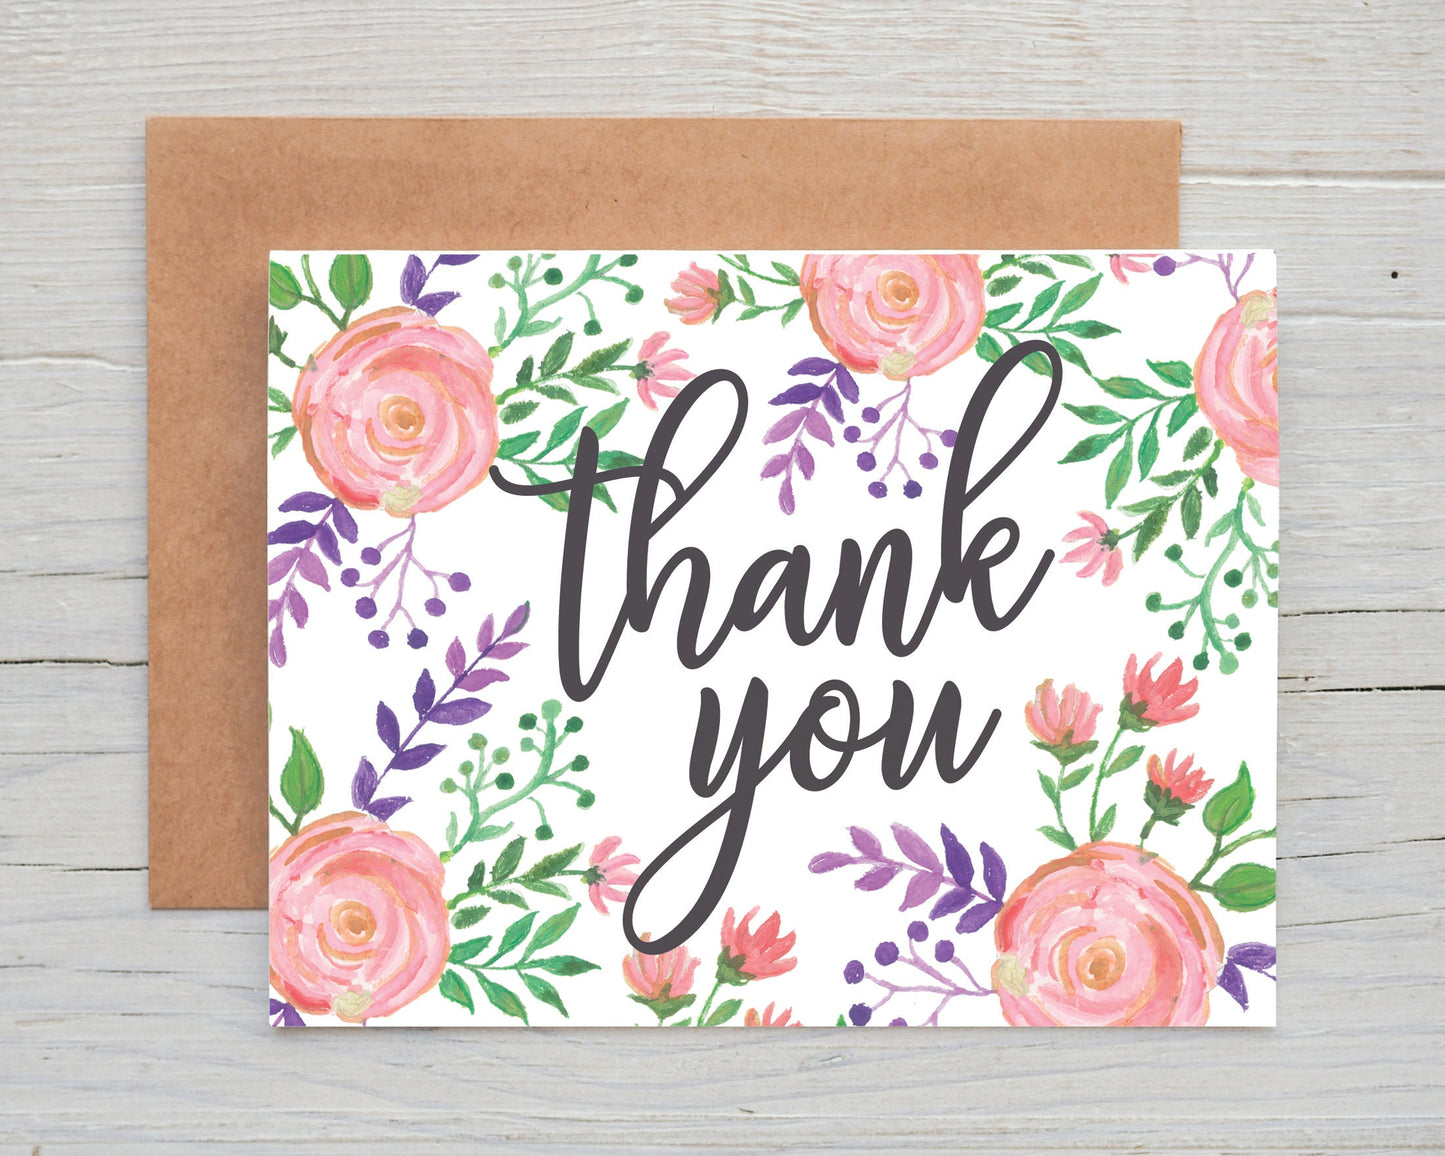 Thank You Card, Floral Thank You Cards, Thank You Cards Pack, Thank You Cards Wedding Bridal Shower Thank you Cards, Item Code - COTC T04